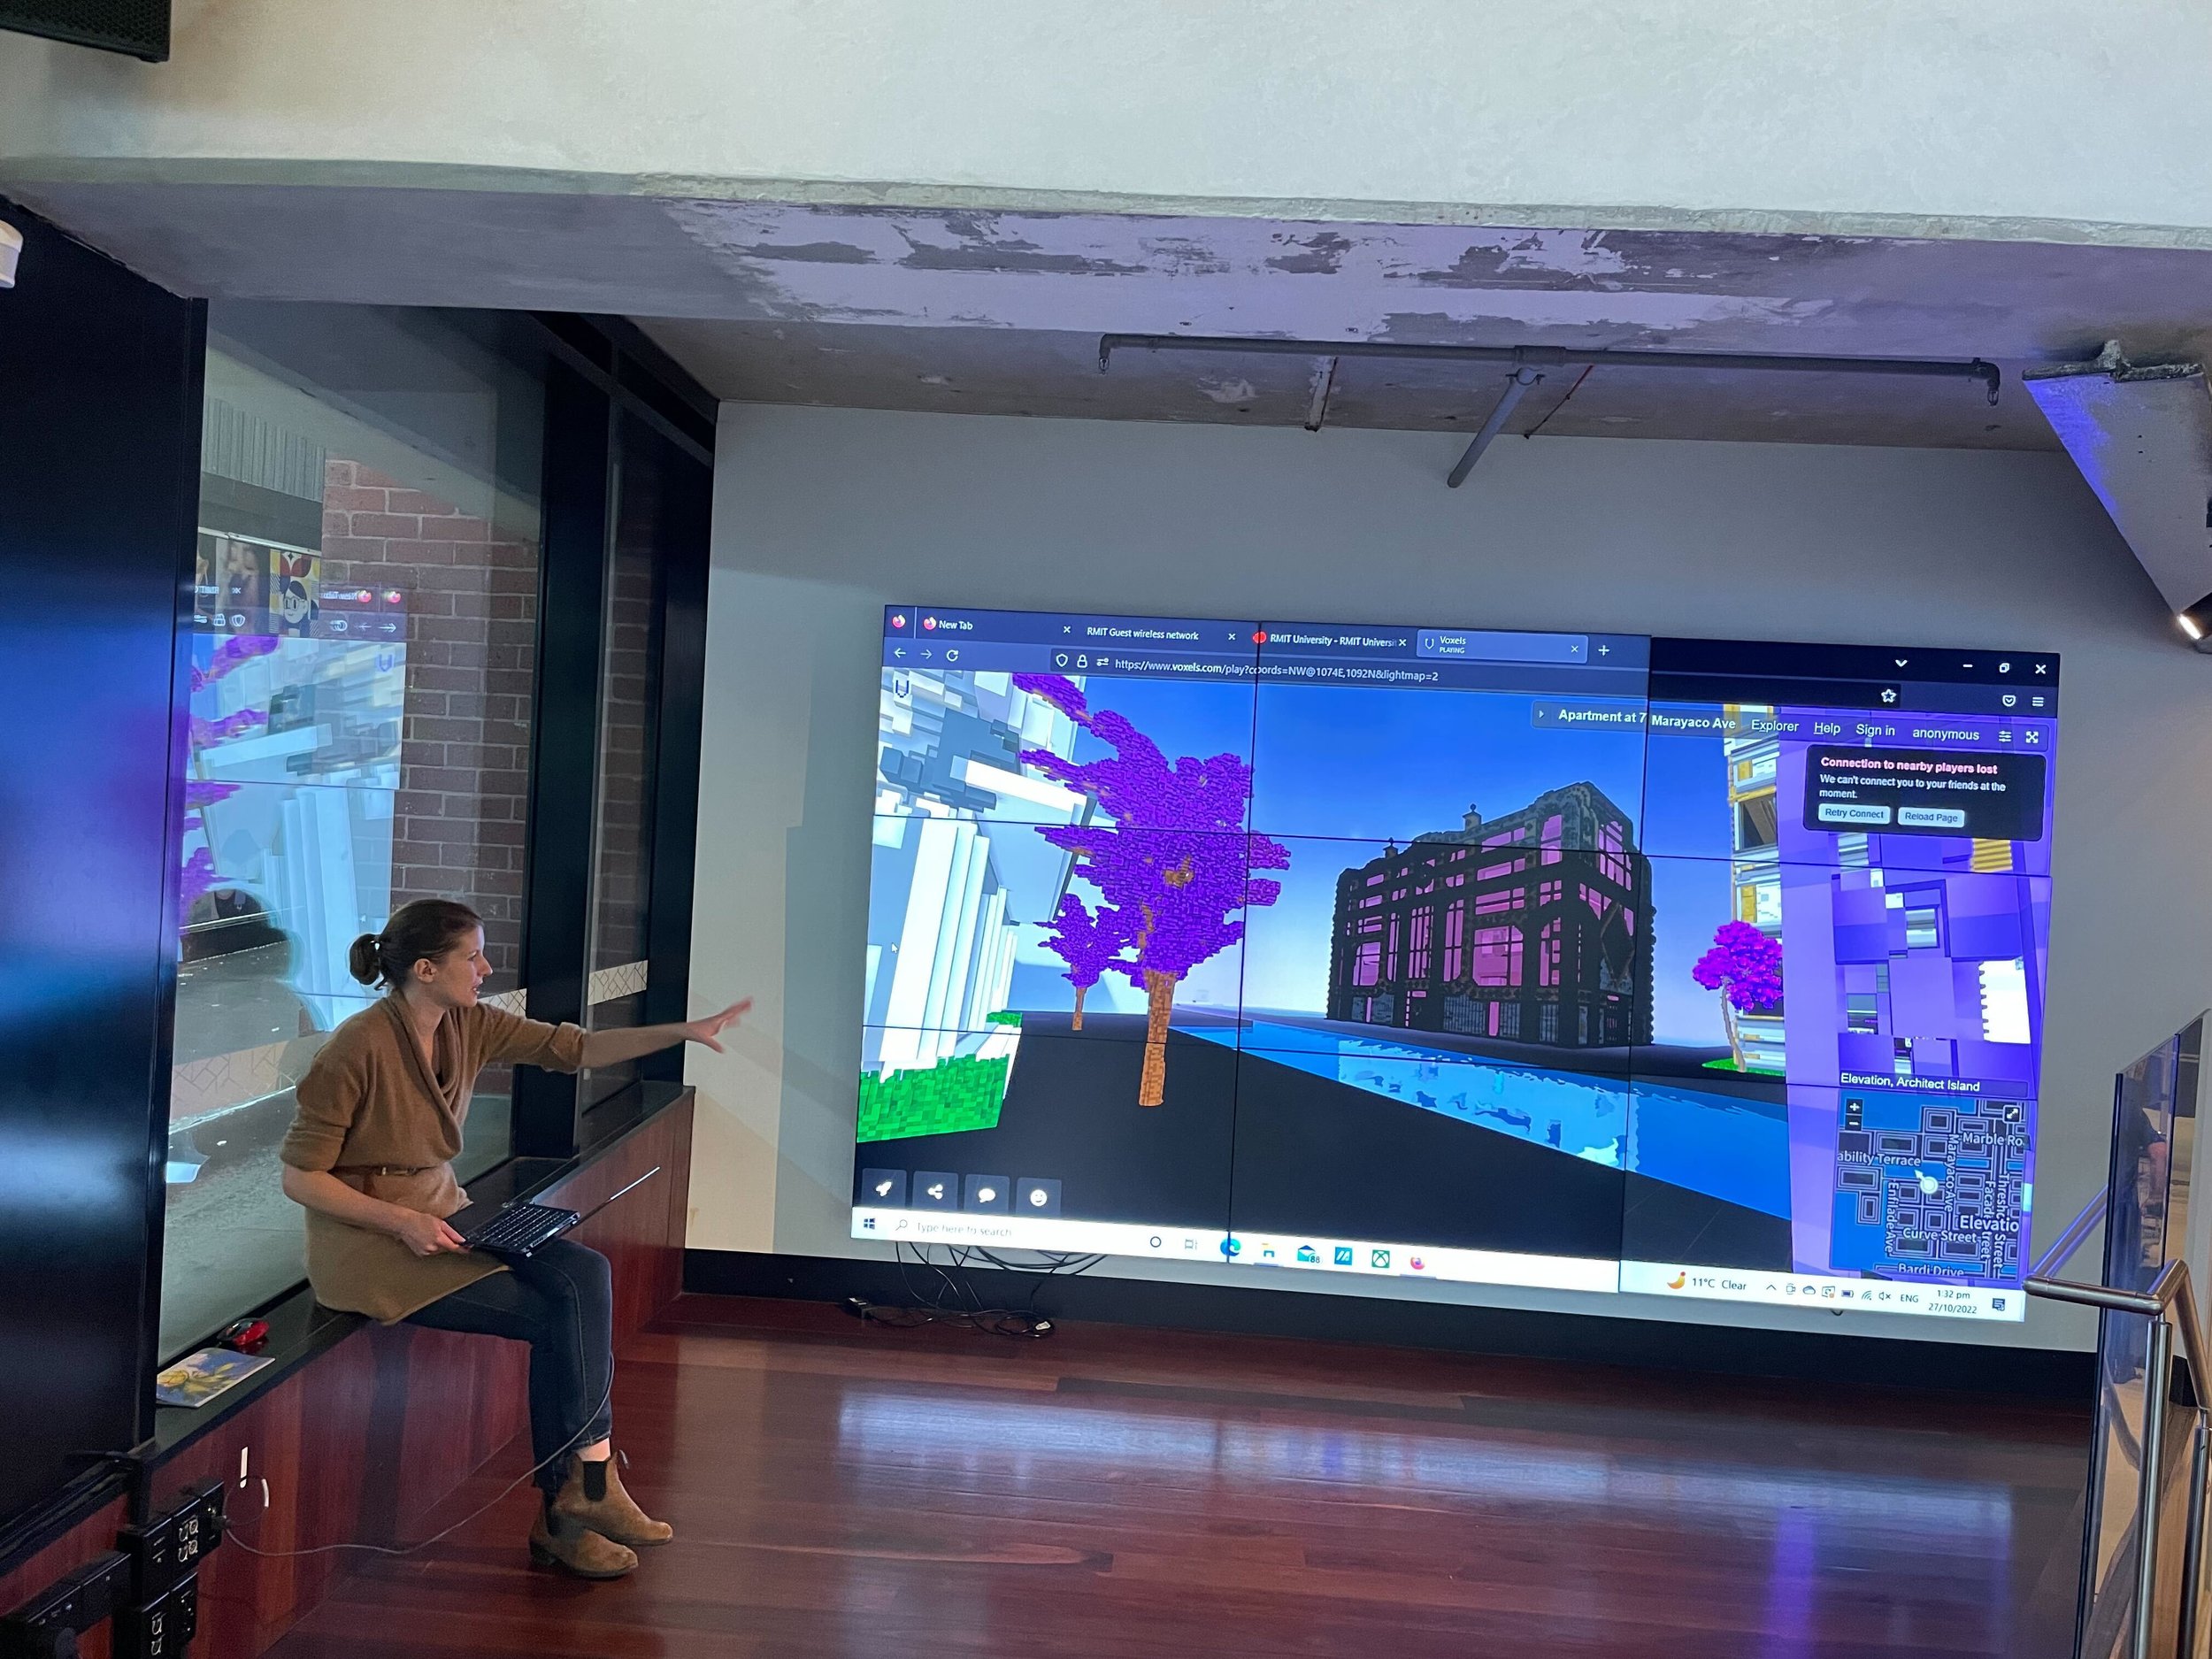 Setting up the virtual world with Voxels